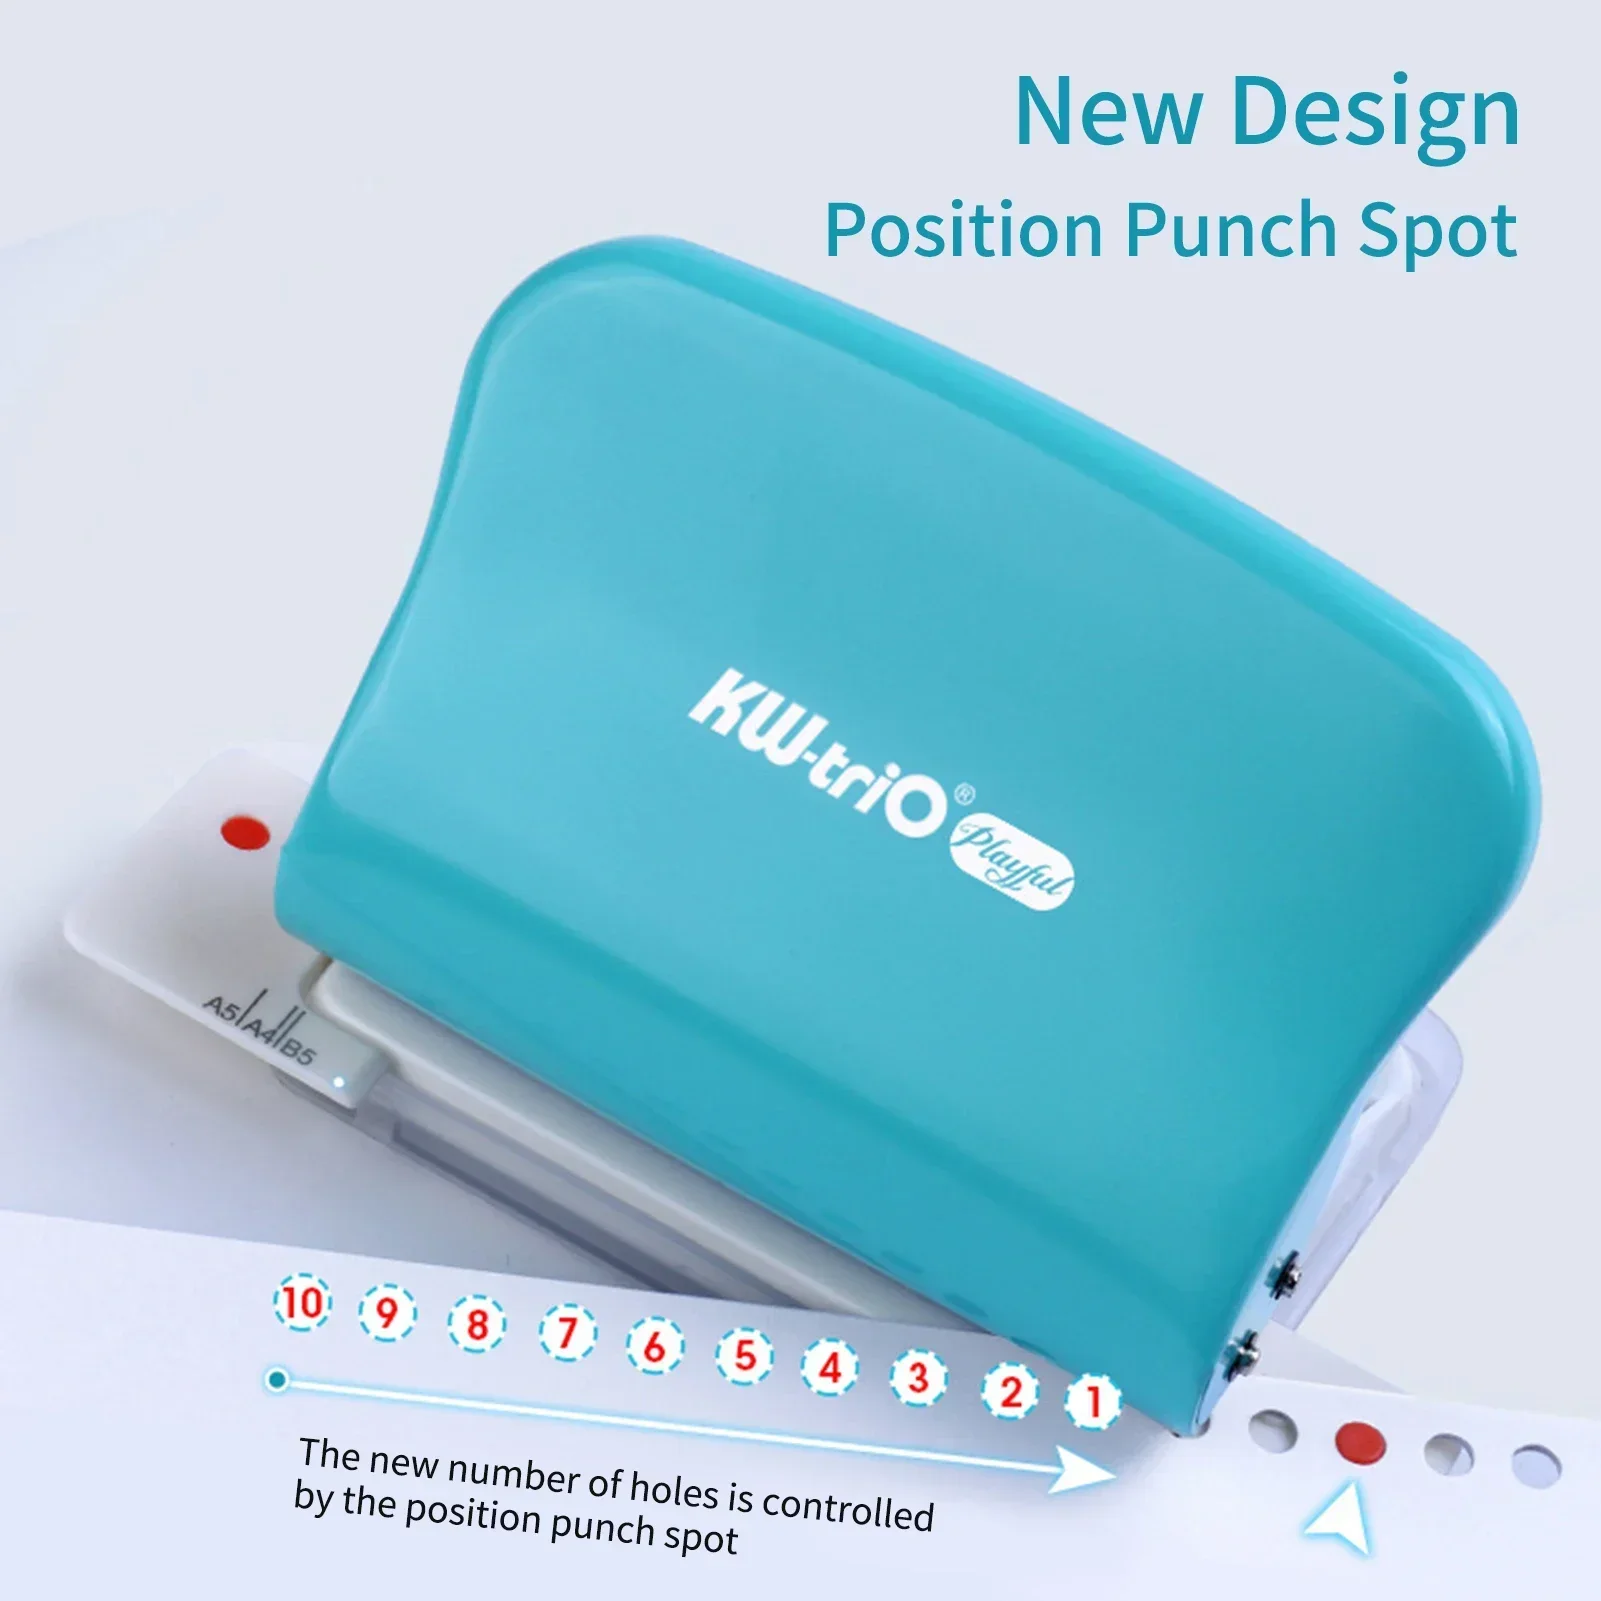 punching-handheld-10-hole-punch-puncher-hole-20-26-30-paper-metal-10-notebook-multiple-kw-trio-support-for-sheet